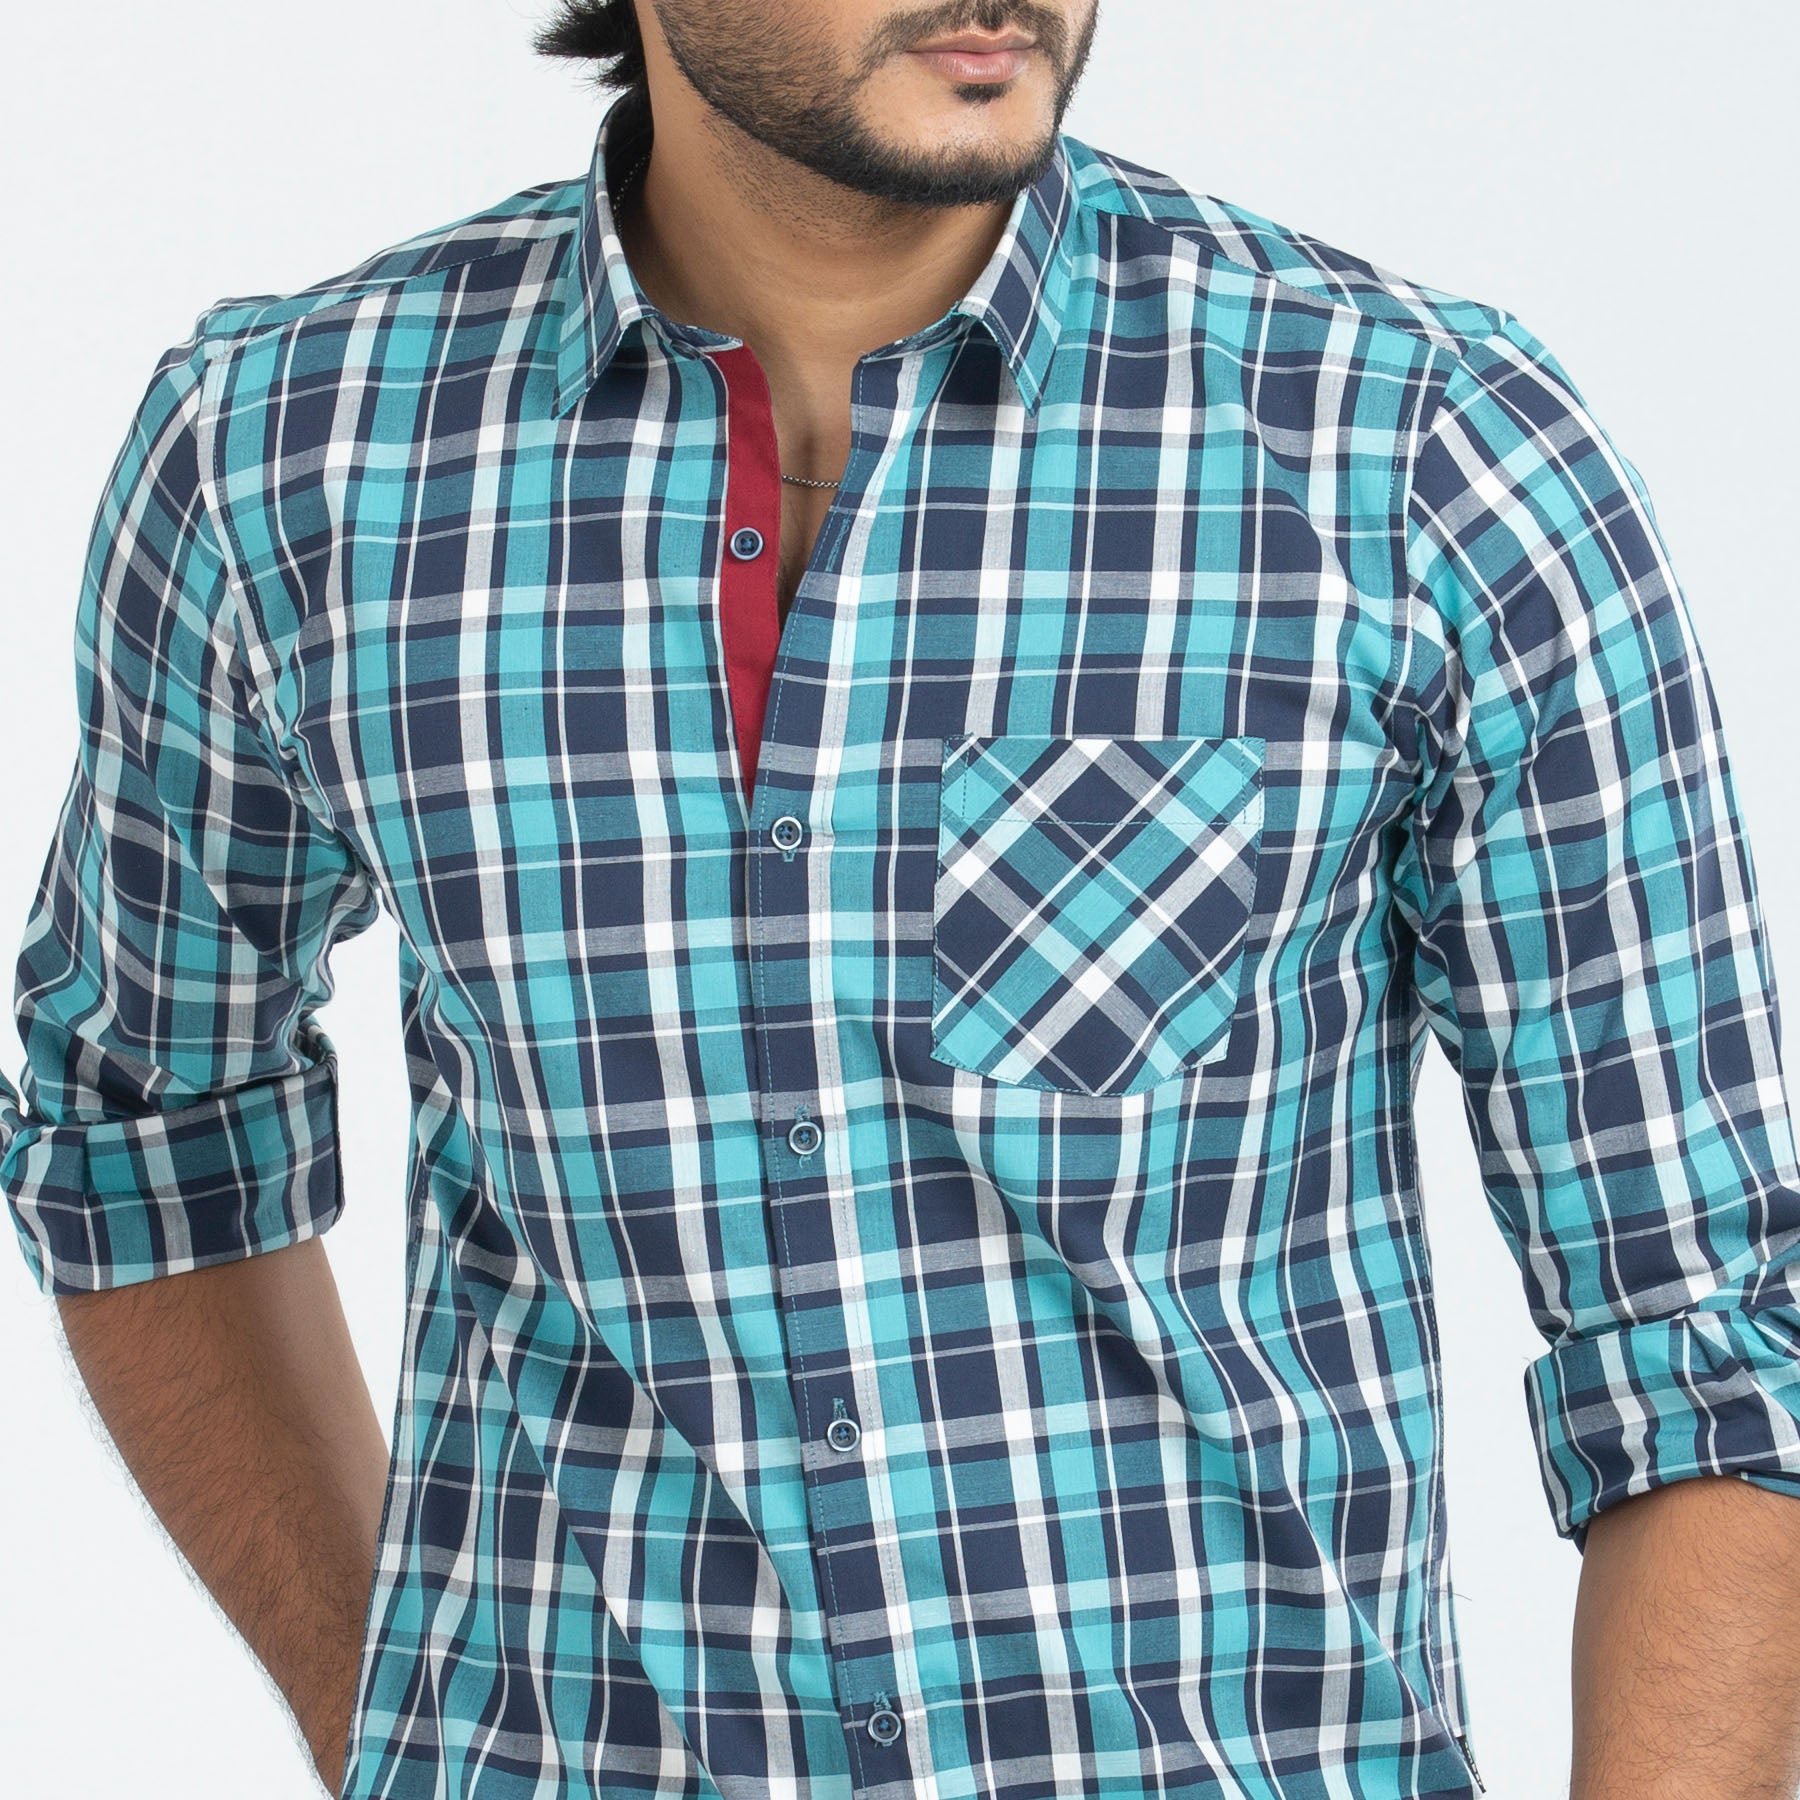 Pest Check Mixed Cotton Fitted Shirt | Shirt For Men